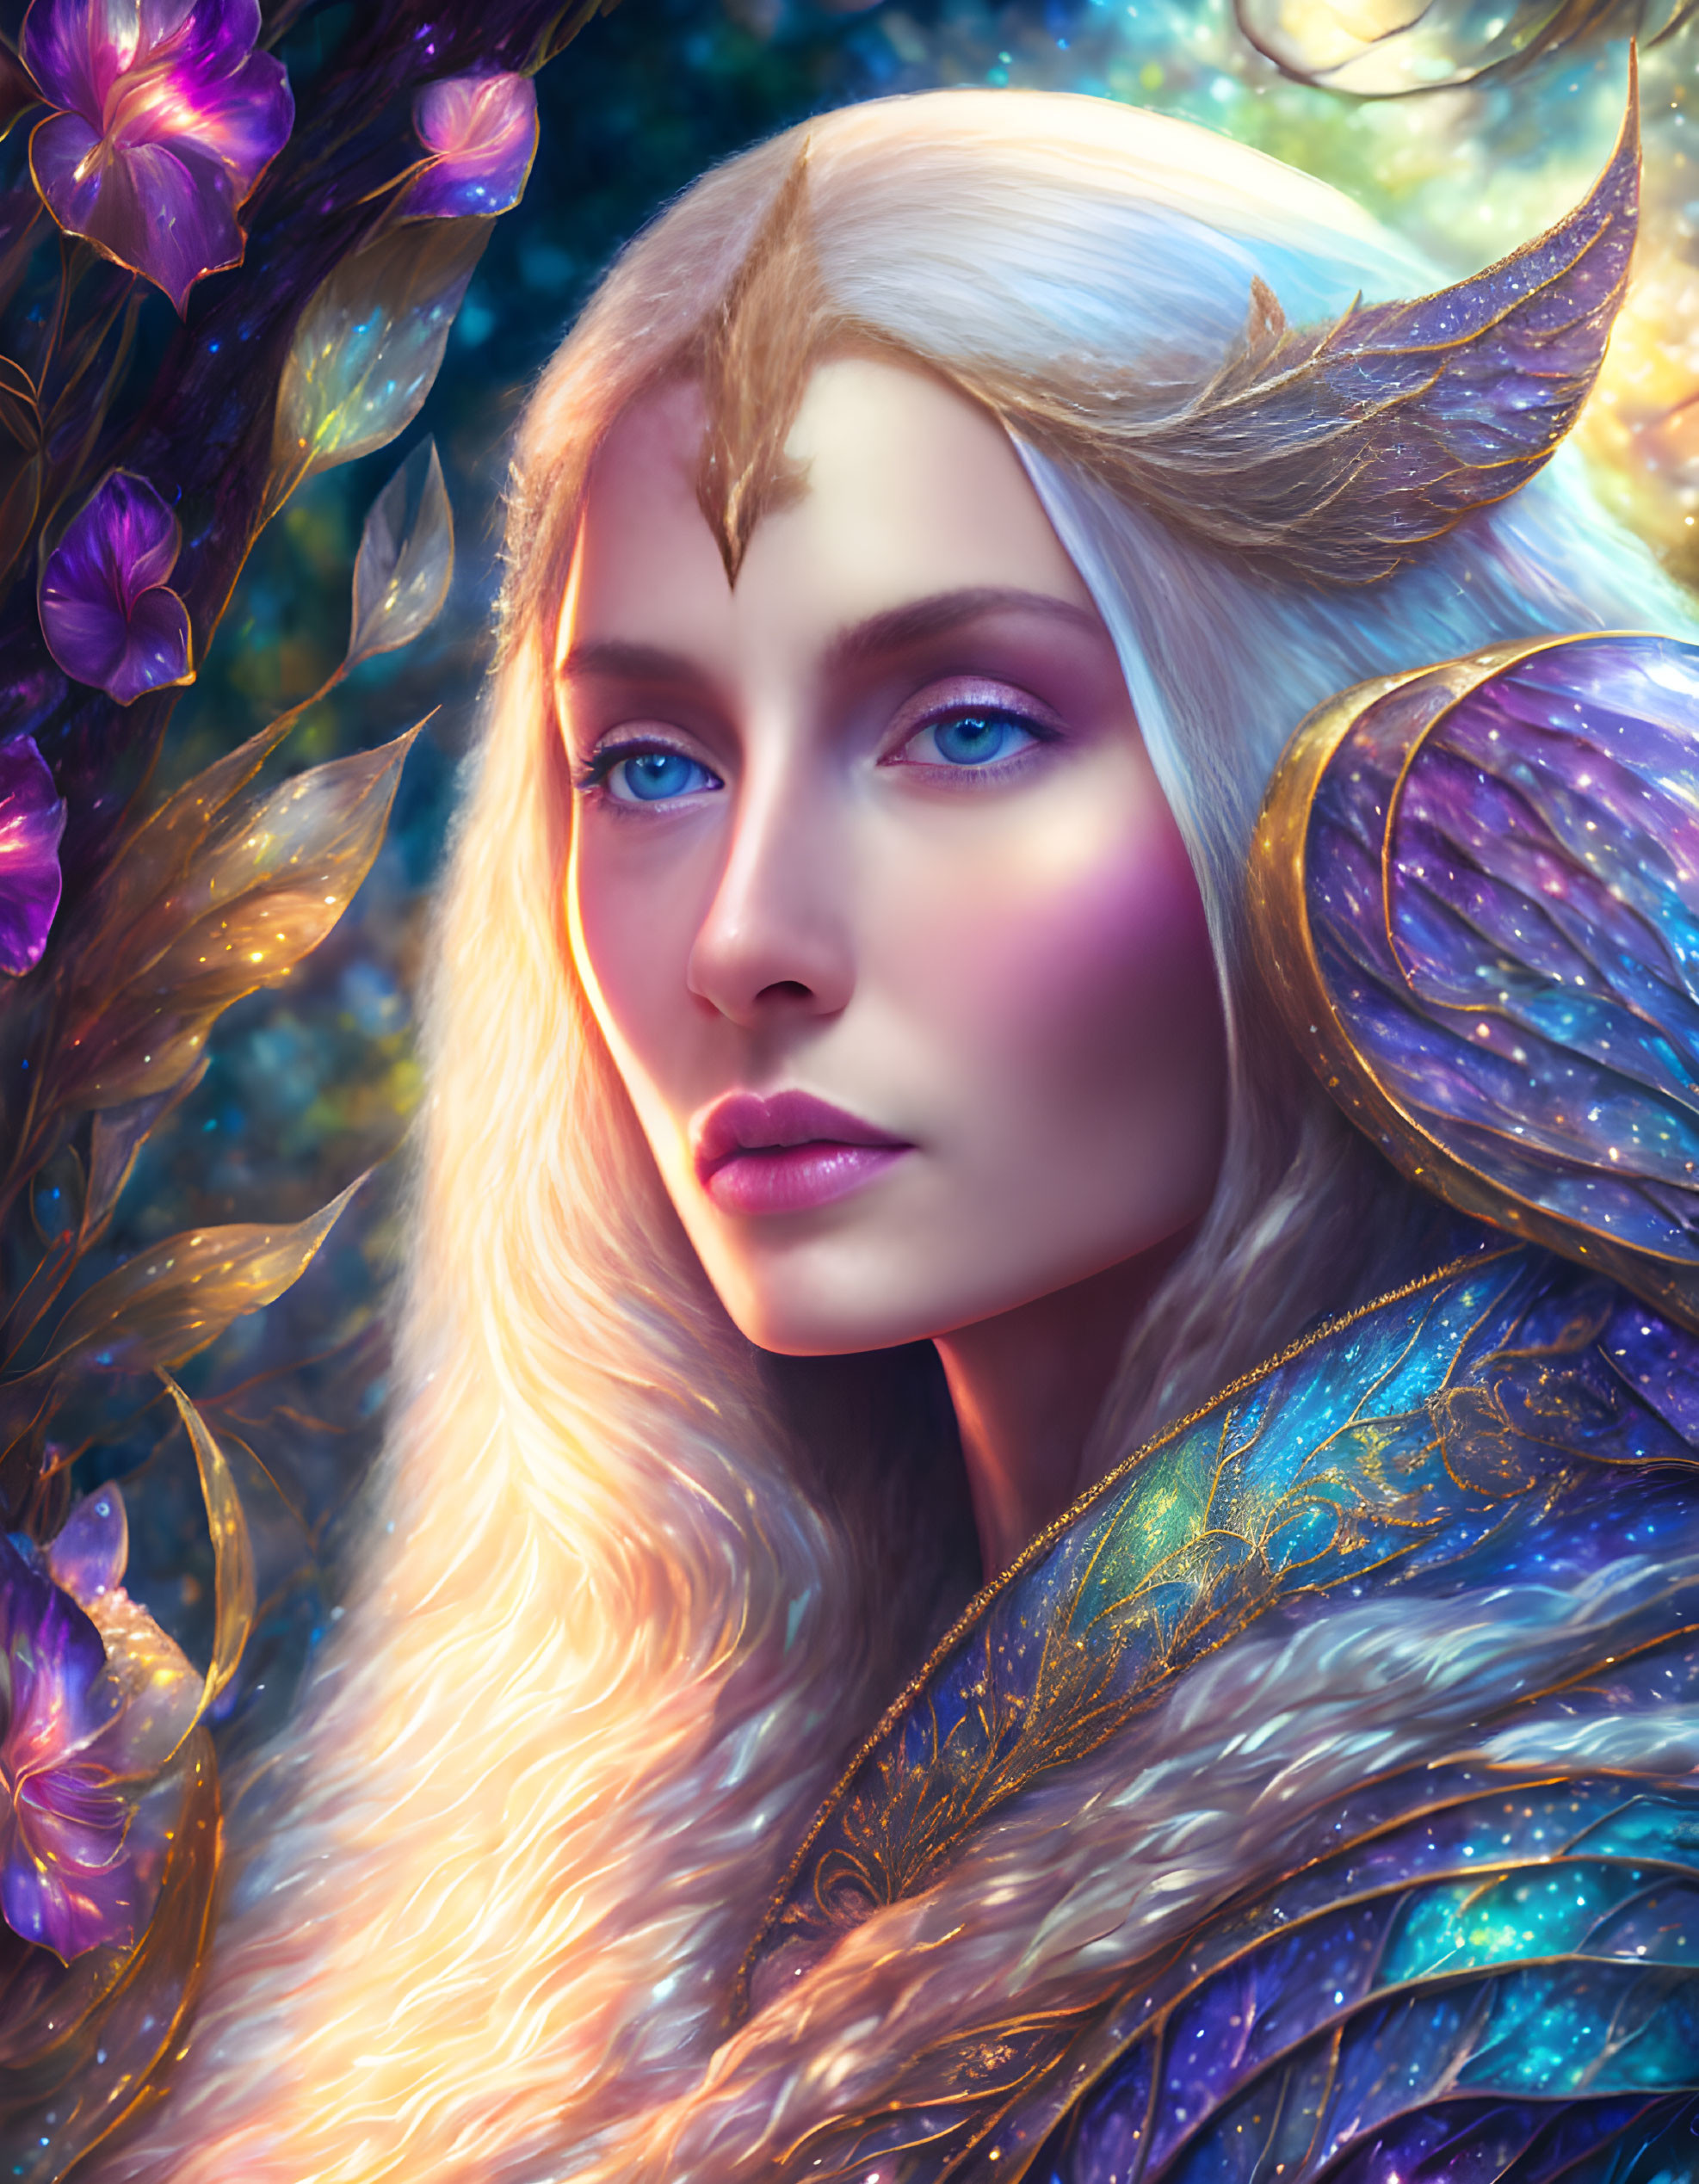 Ethereal elf with blue eyes in golden armor amidst luminescent flora